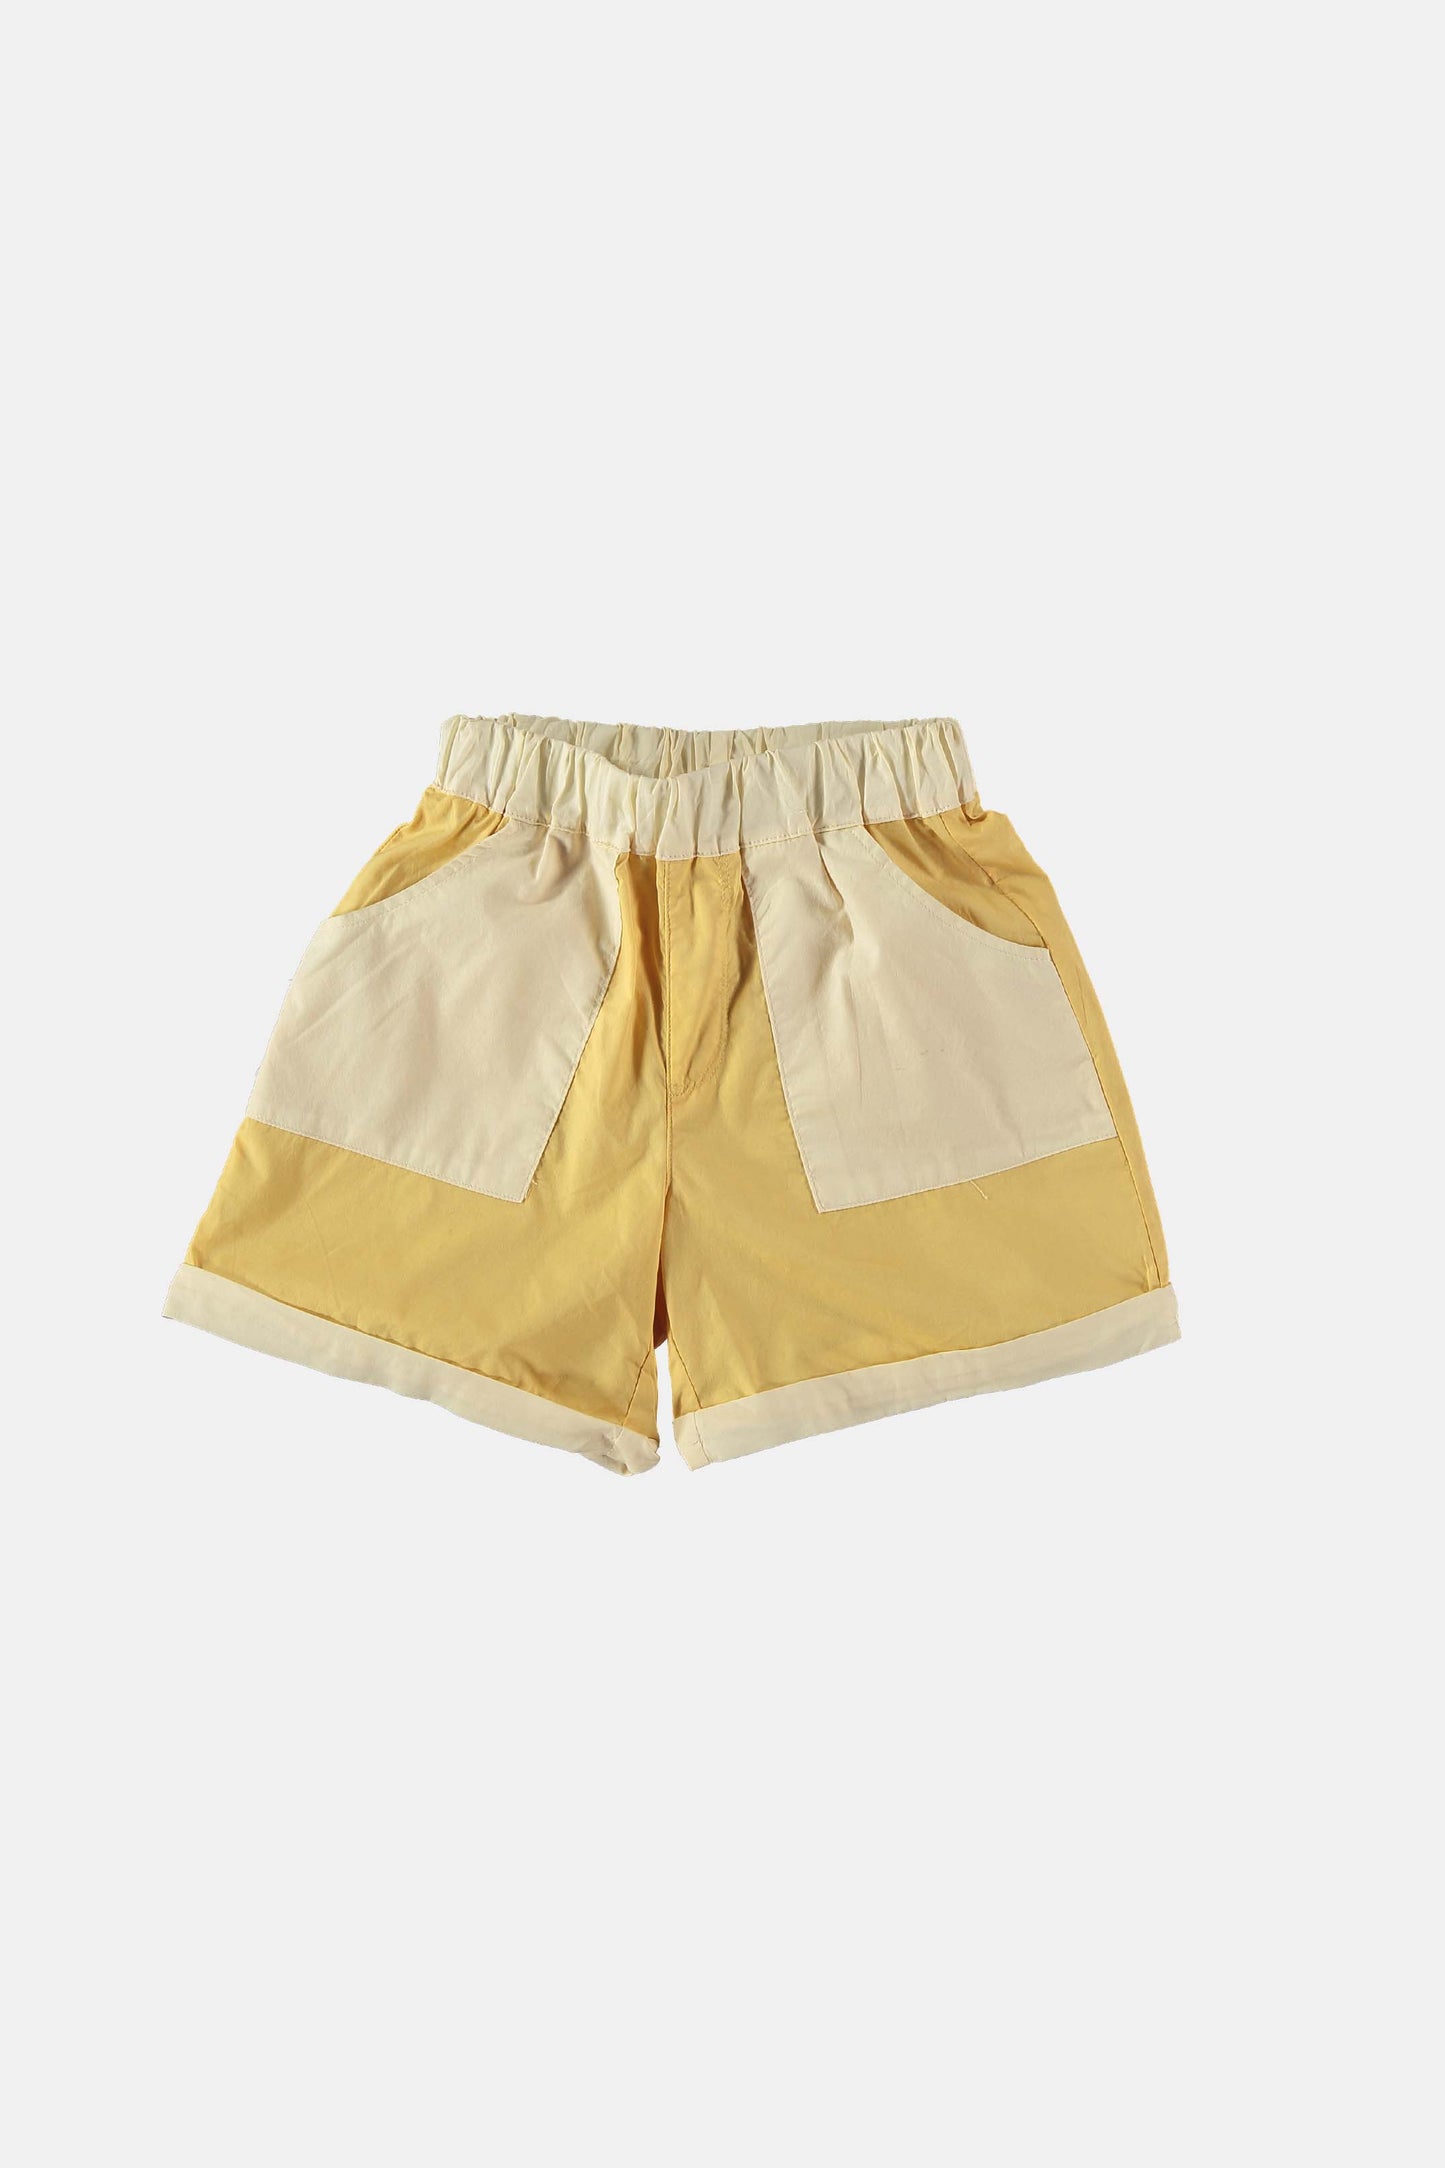 Coco Au Lait YELLOW VINTAGE WIDE SHORTS  Yellow